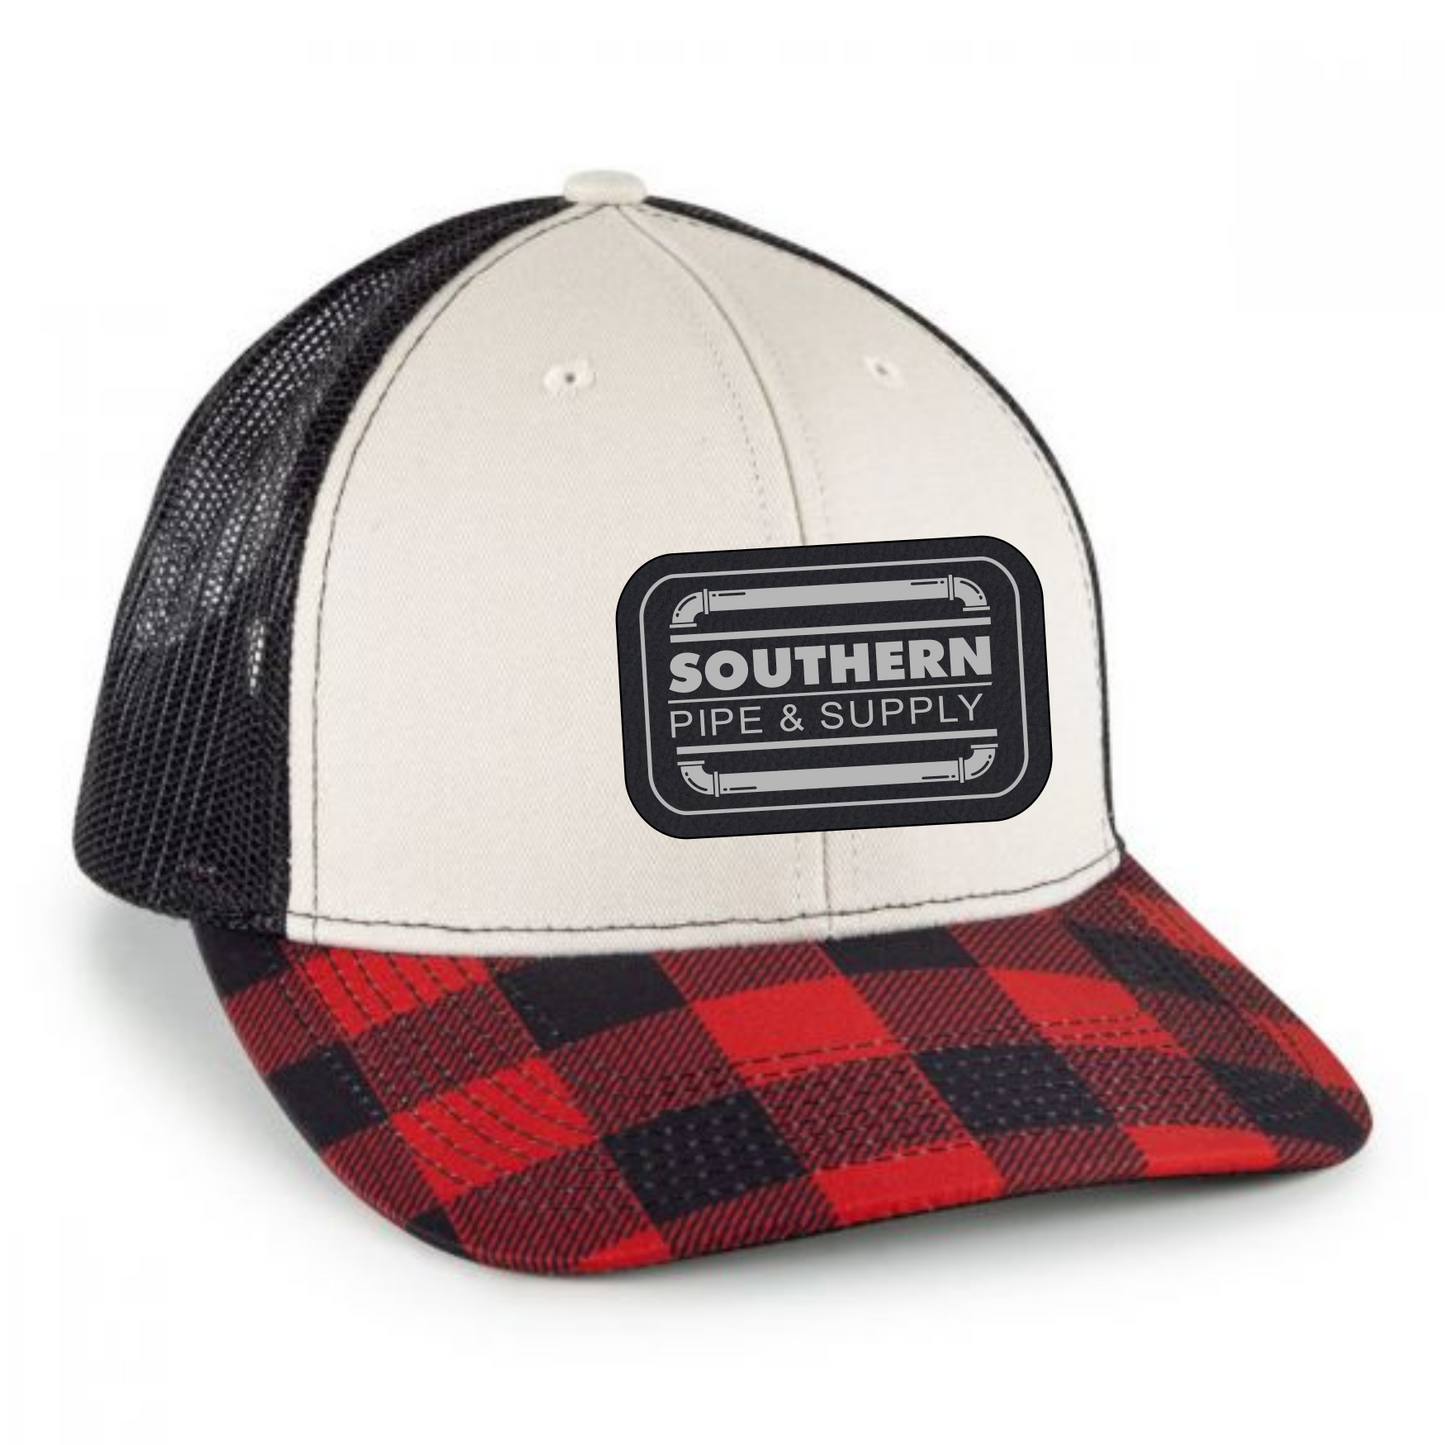 Plaid Bill Cap with Patch